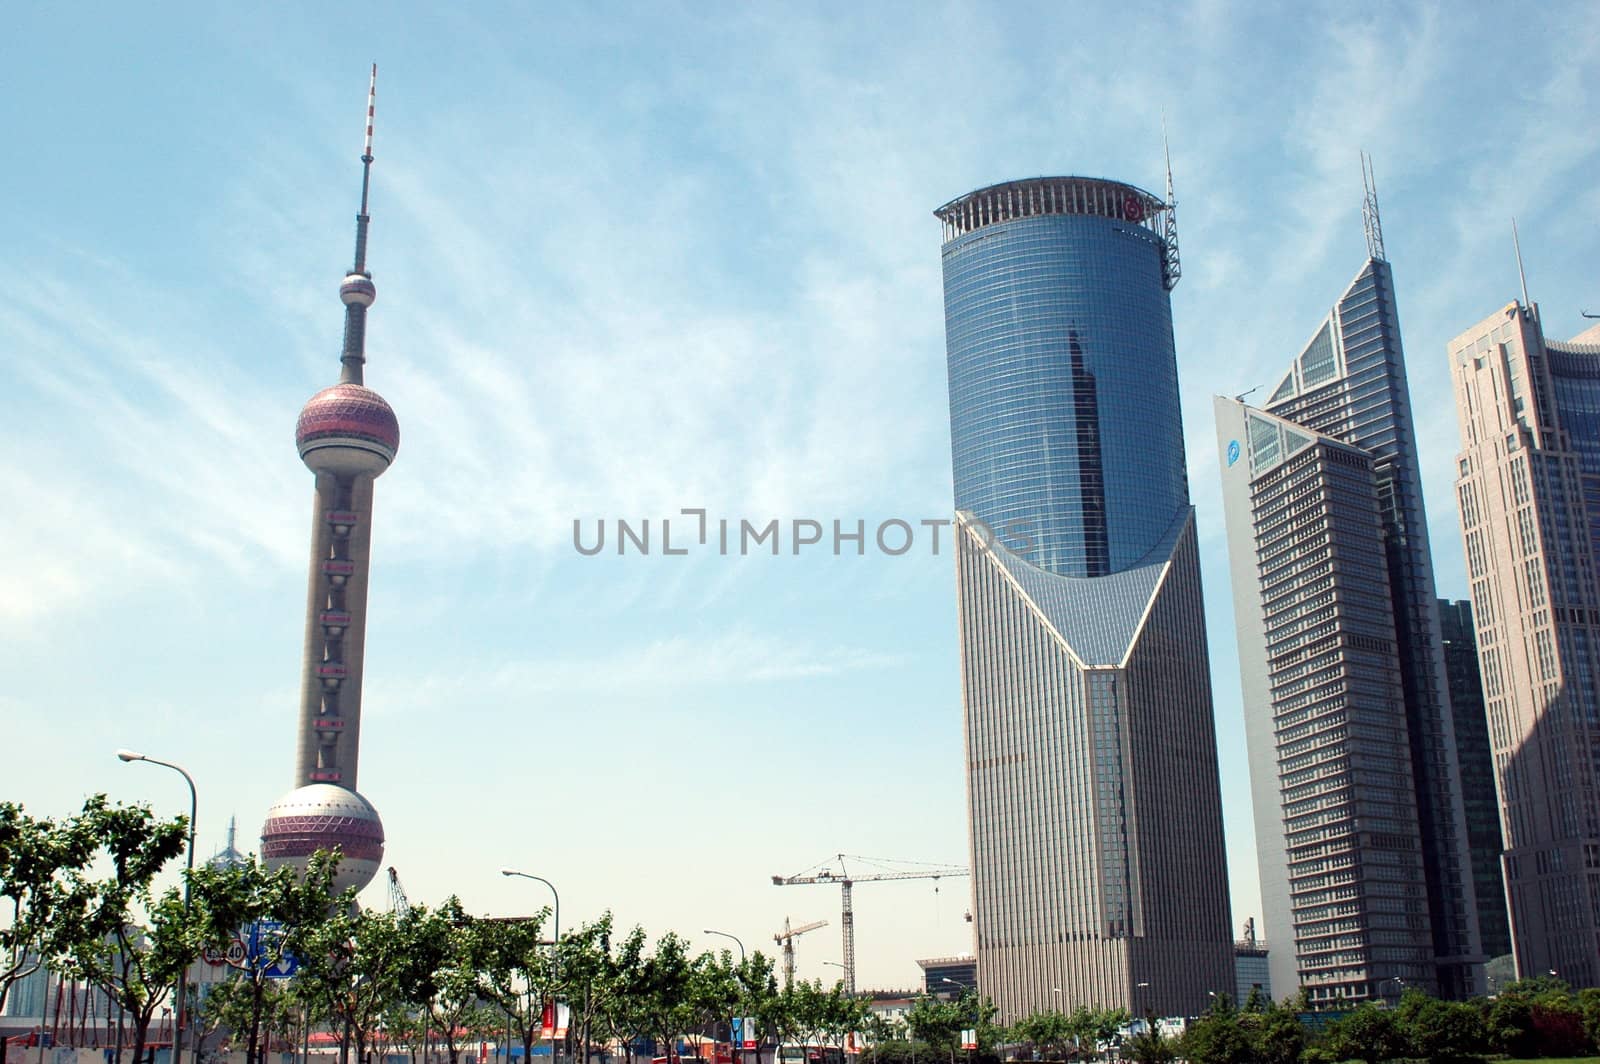 Shanghai - city center with moderns office buildings and Orient Pearl tower.